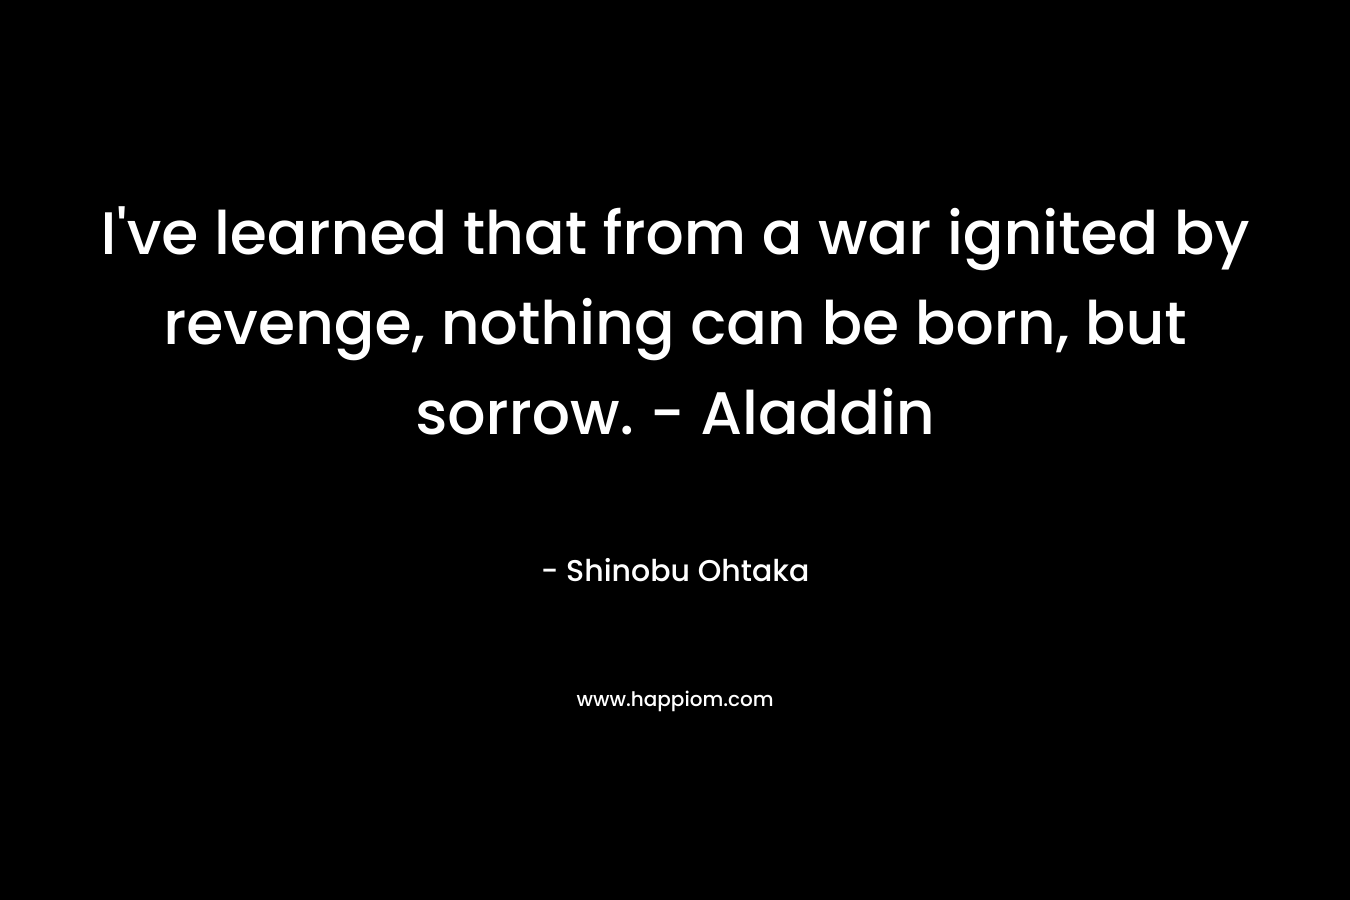 I've learned that from a war ignited by revenge, nothing can be born, but sorrow. - Aladdin